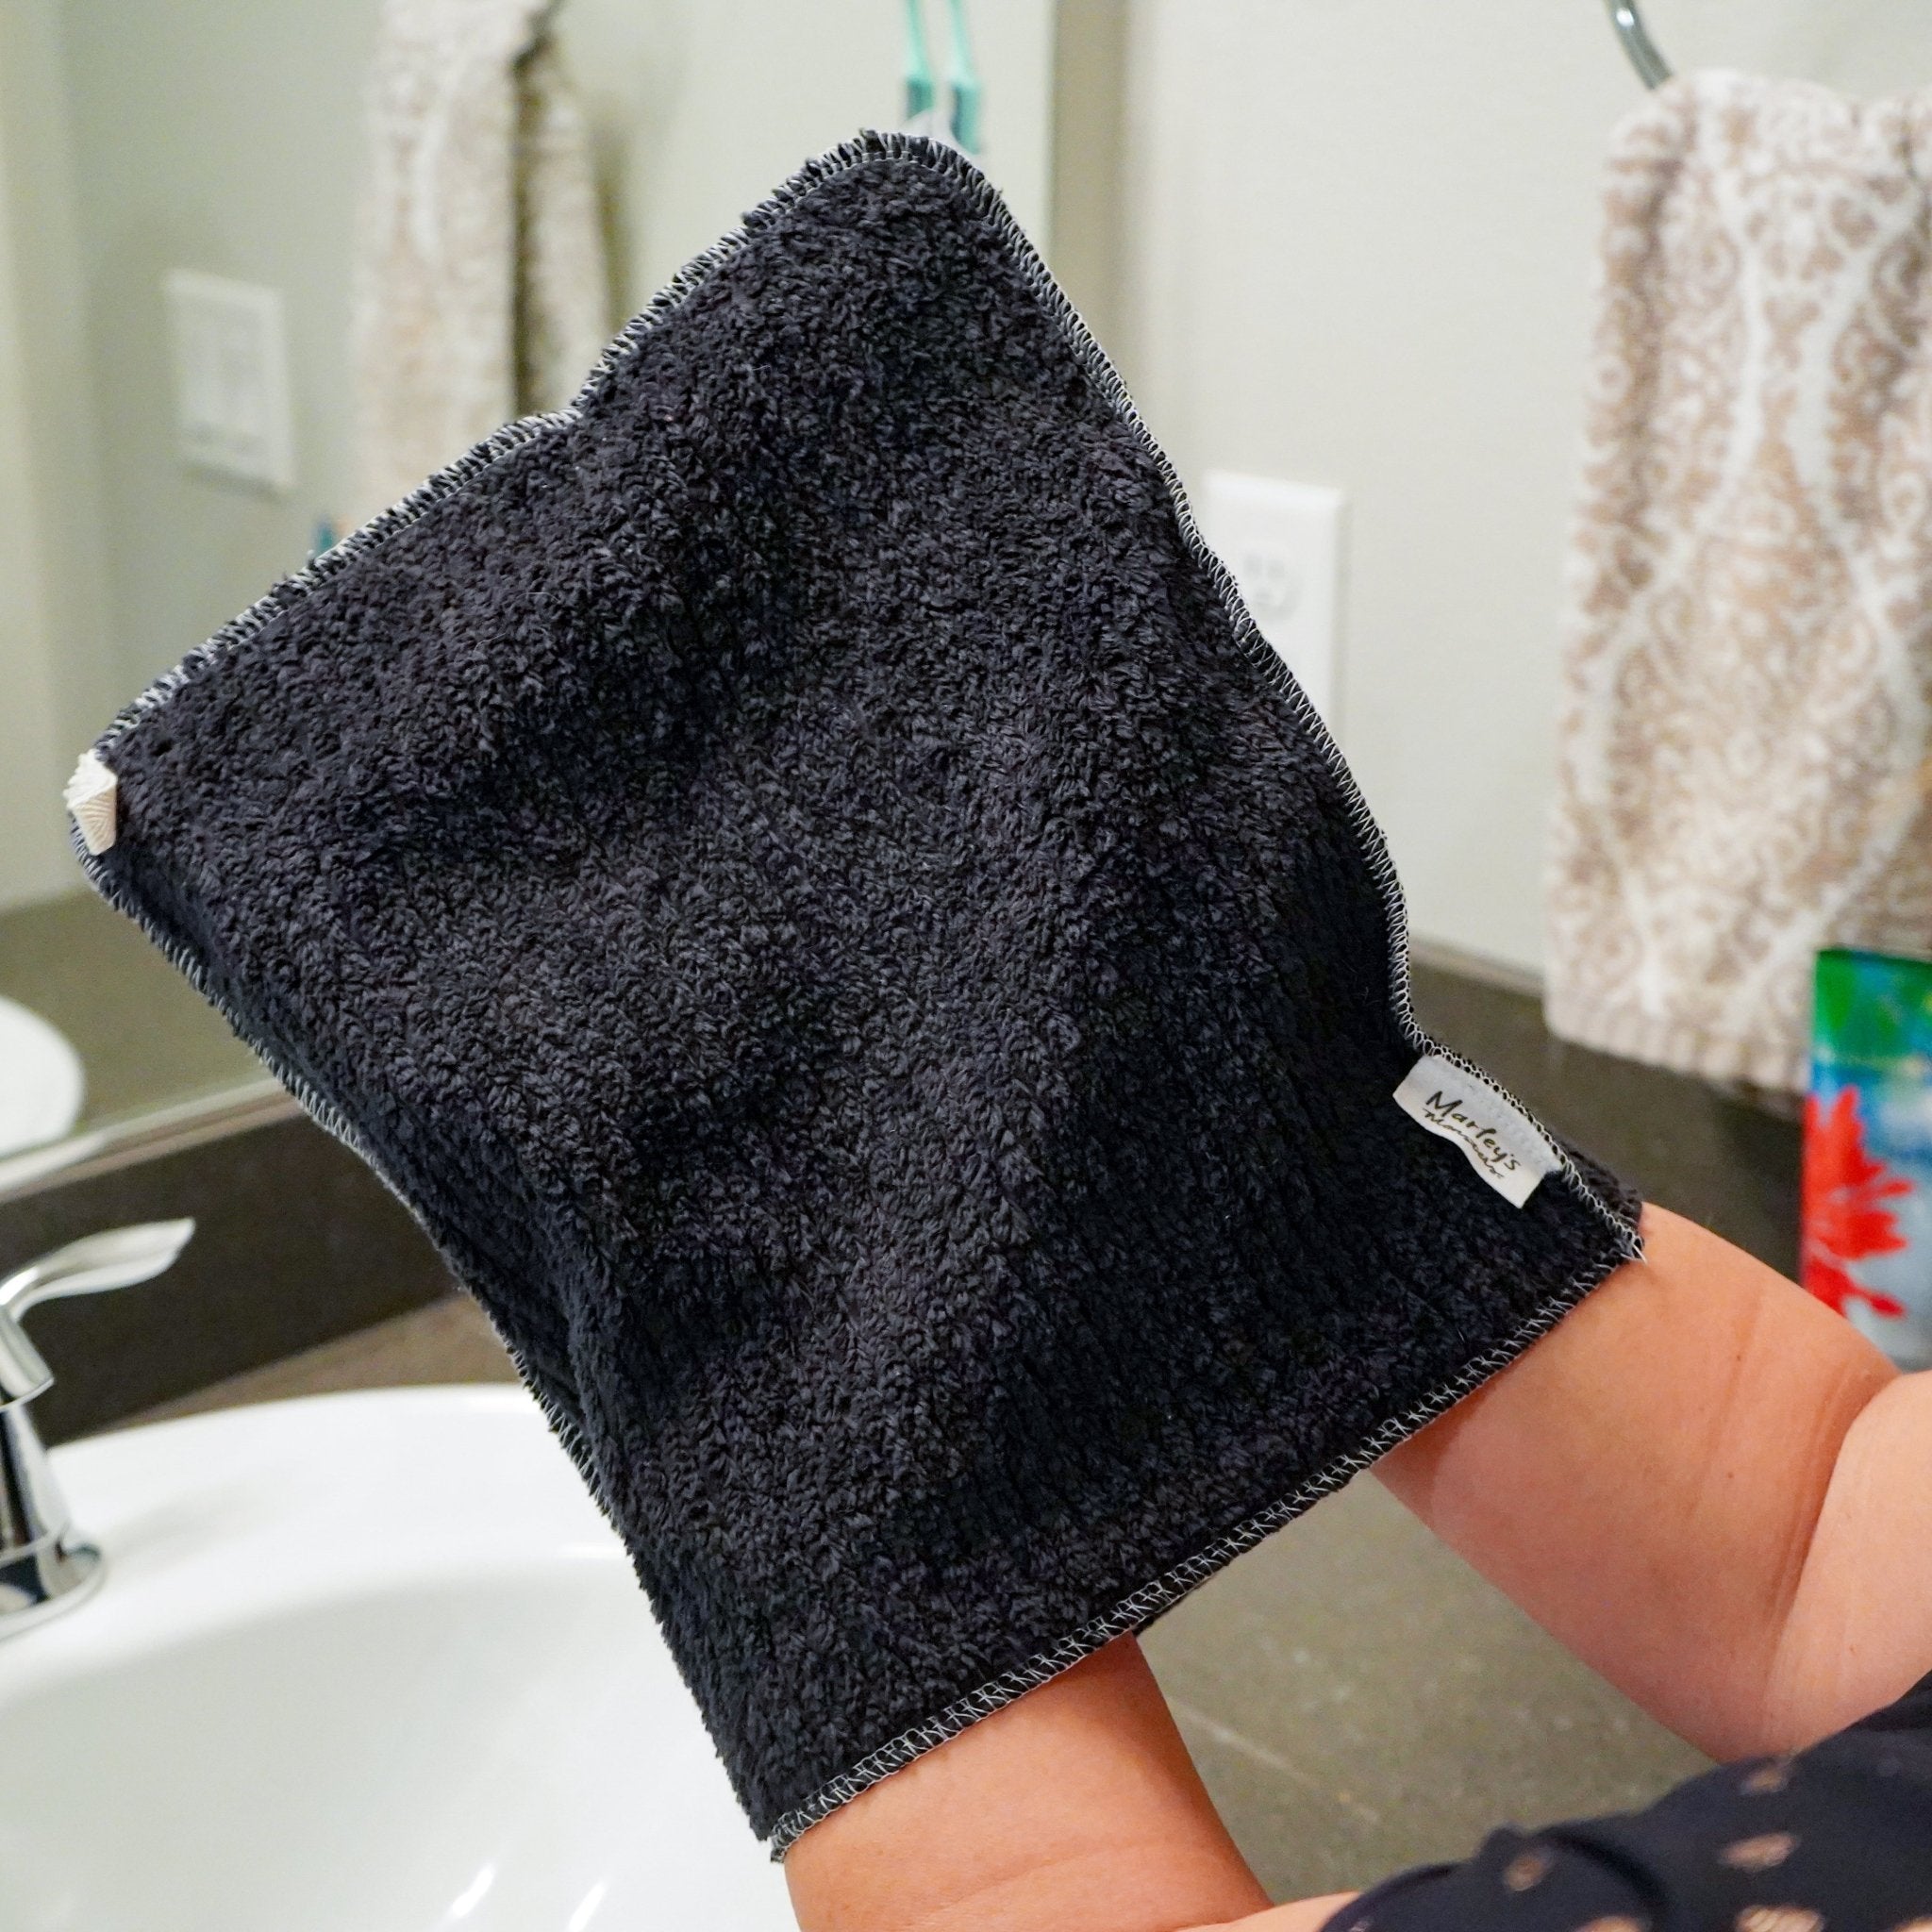 Makeup Towel: Cotton Chenille - Marley's Monsters